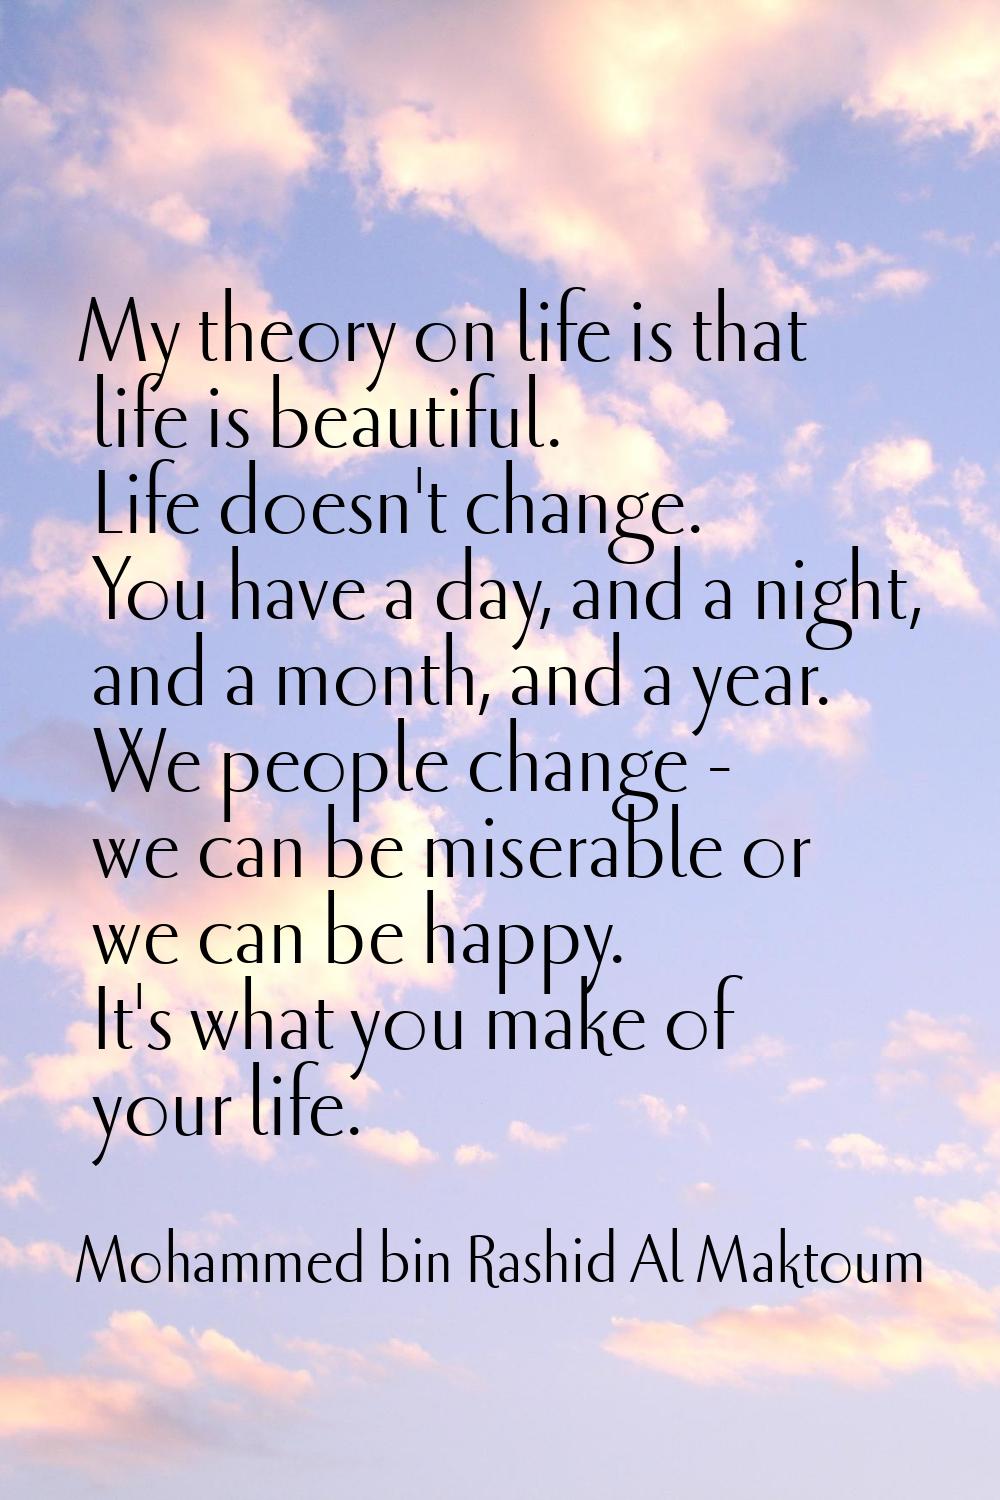 My theory on life is that life is beautiful. Life doesn't change. You have a day, and a night, and 